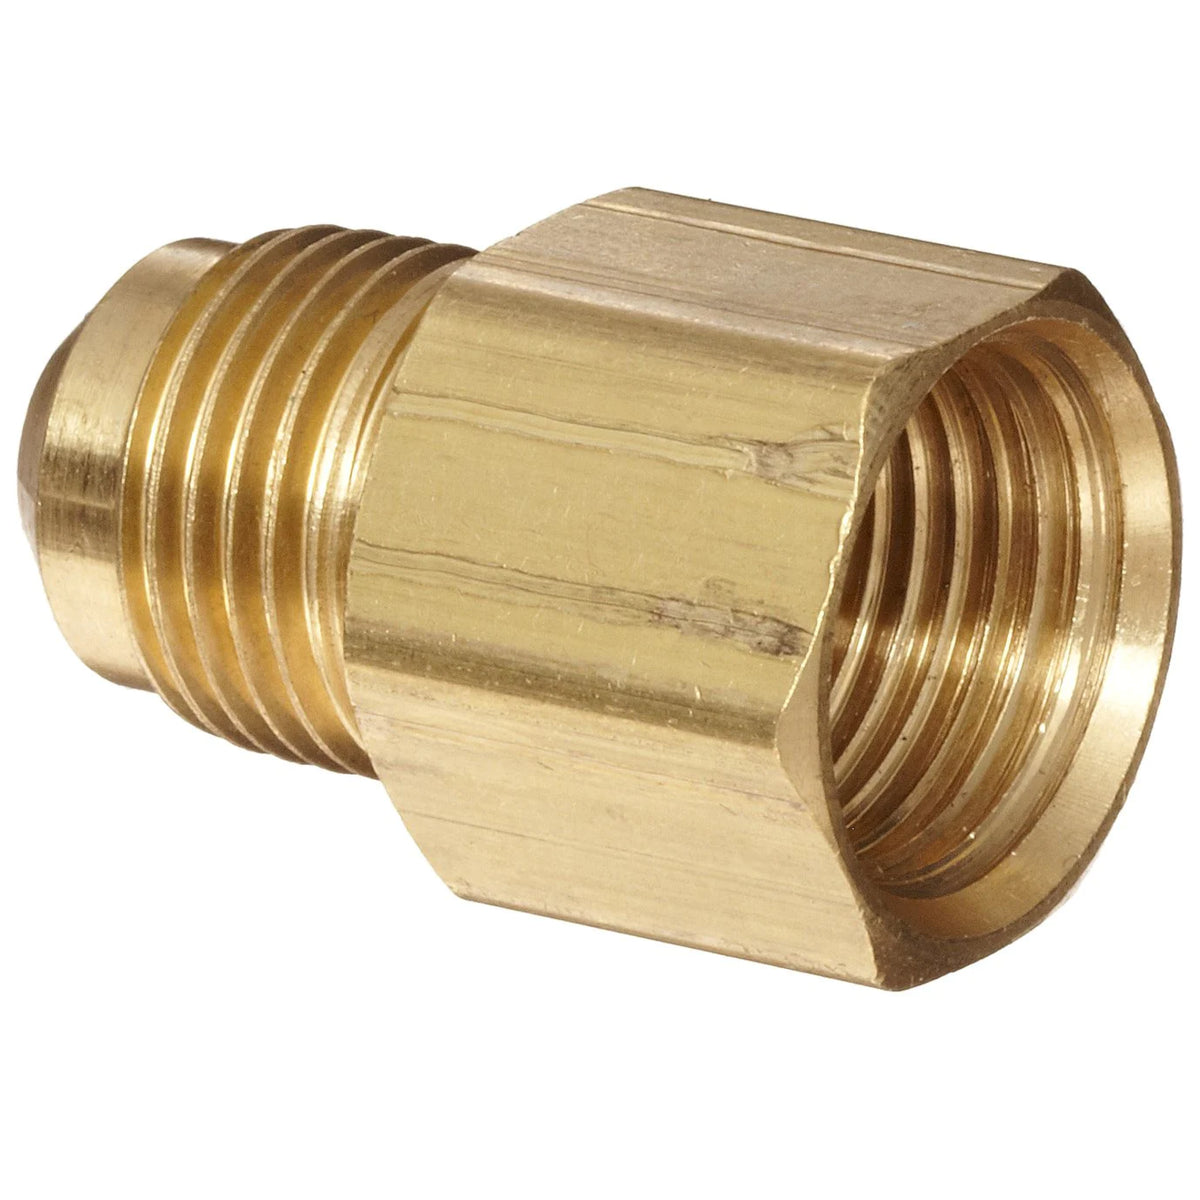 Brazilian Flame Gas Adapter for Pipe Connector